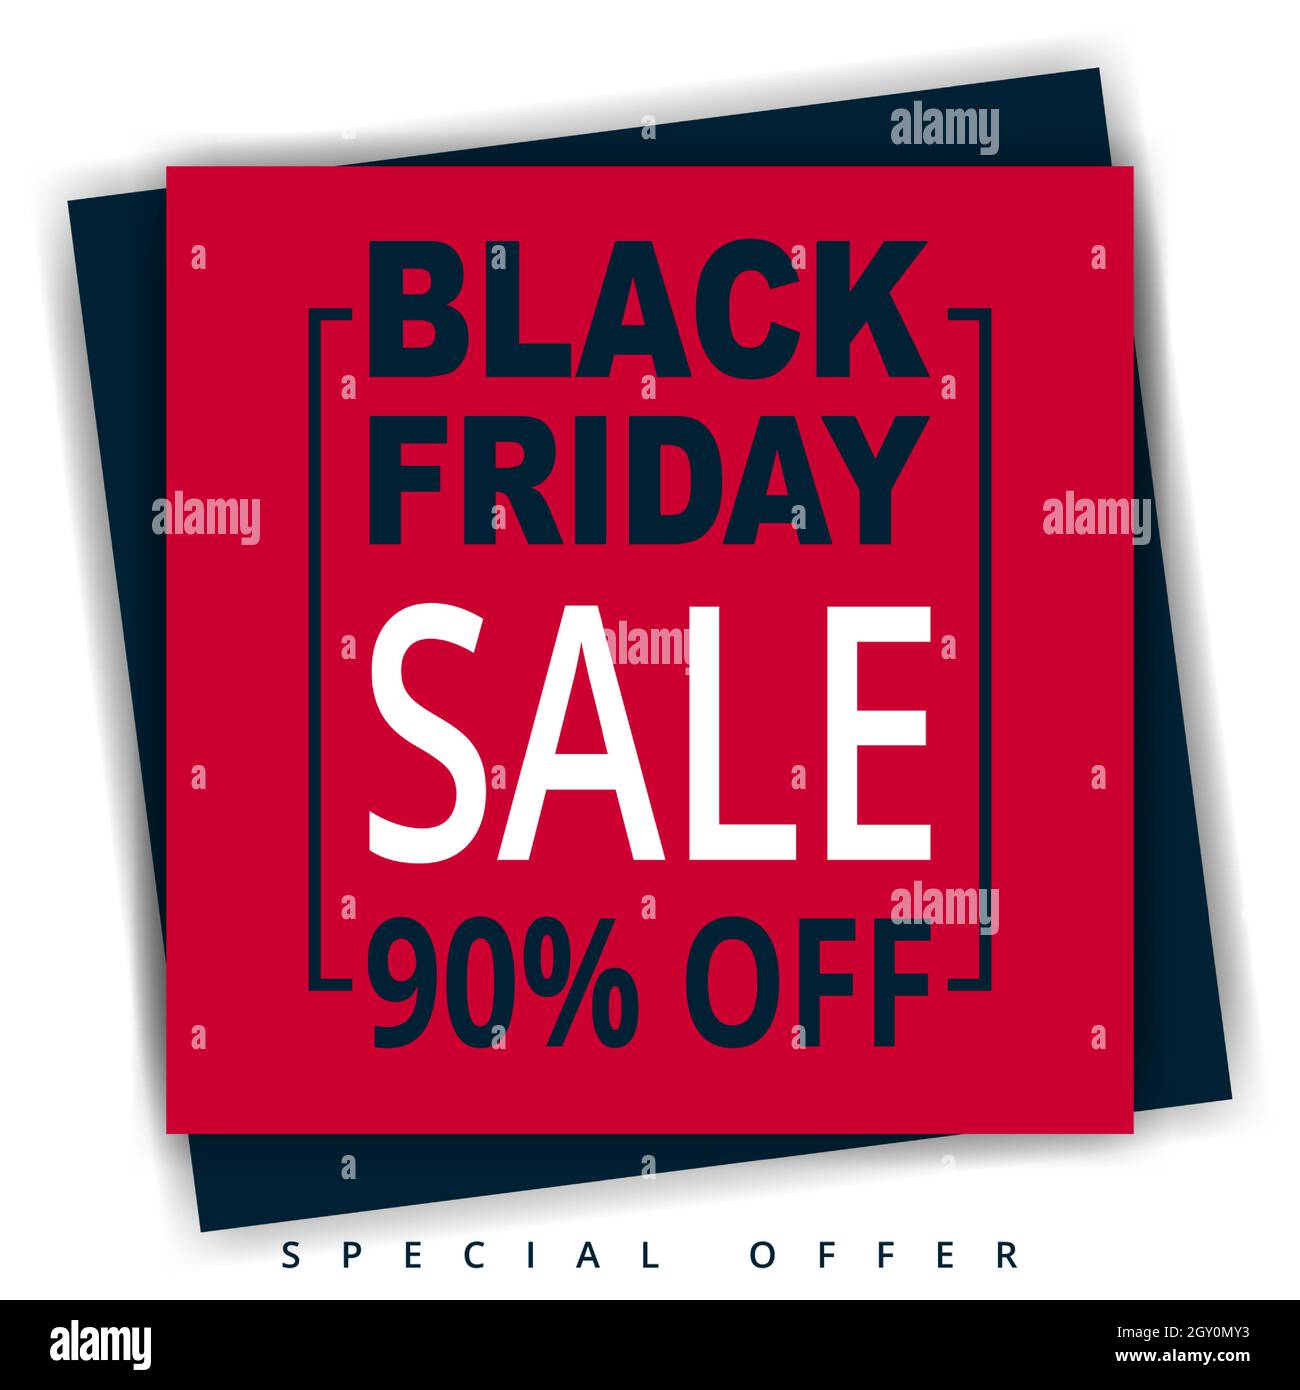 Black friday, paper banner template. Black friday red banner with frame on a blue and white background. Sale up to 90 percent off. Stock Vector